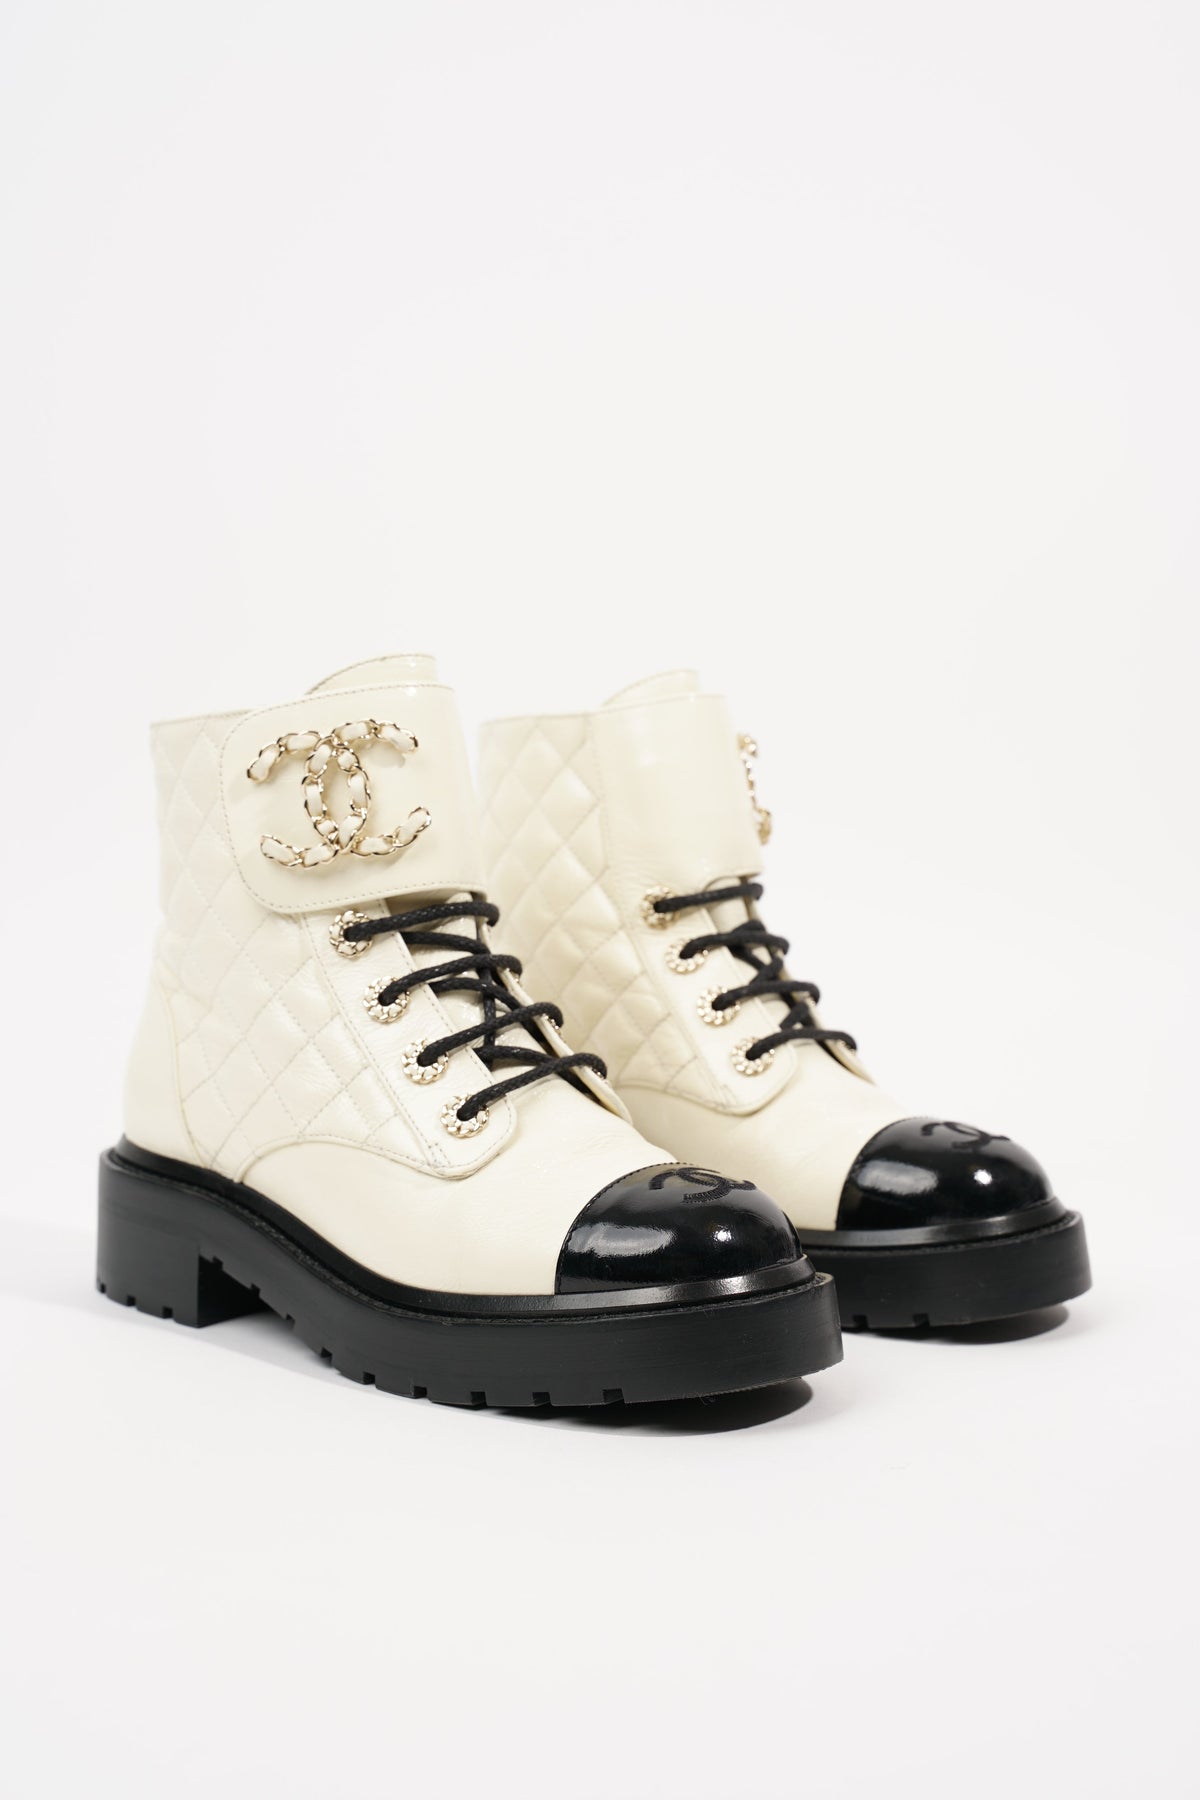 Chanel Womens CC Lace Up Boots White Black EU 35.5 / UK 2.5 – Luxe  Collective